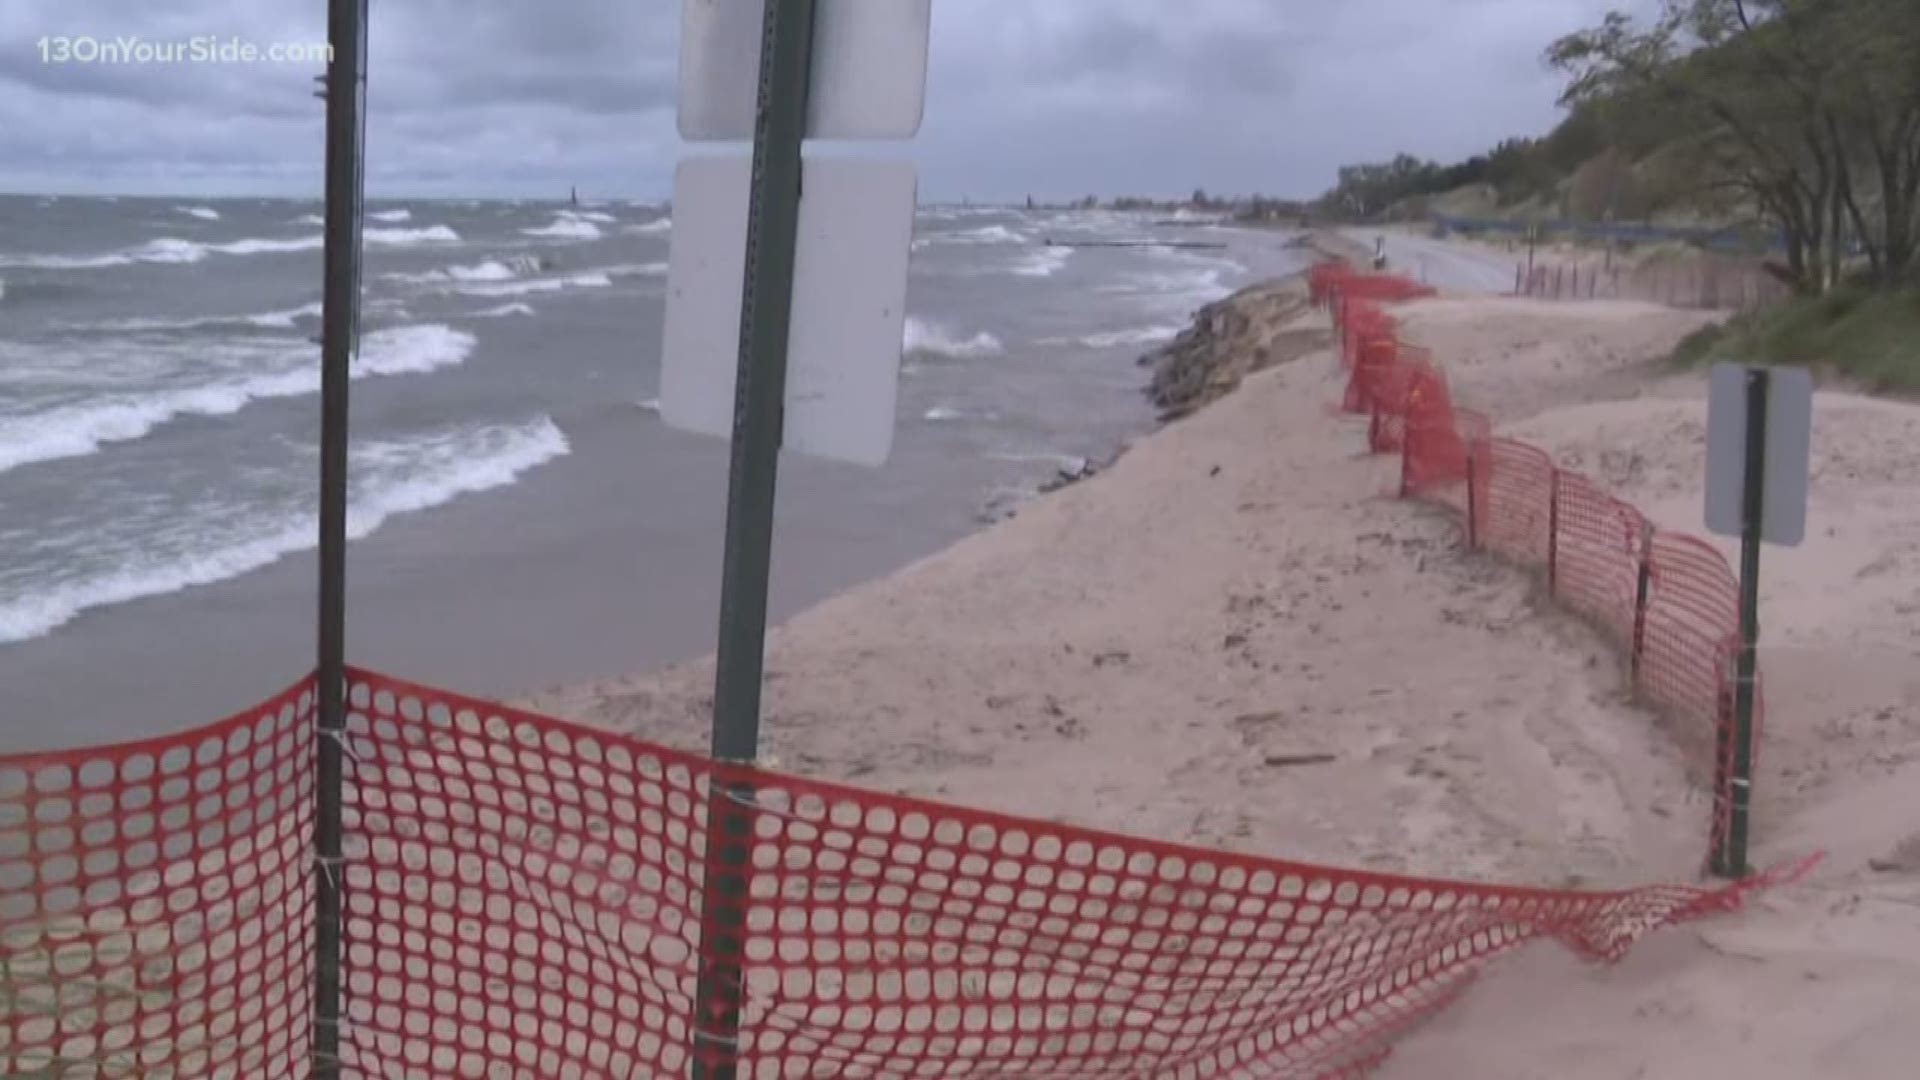 Wednesday the State of Michigan announced plans to help lakeshore property owners whose homes are threatened by erosion.